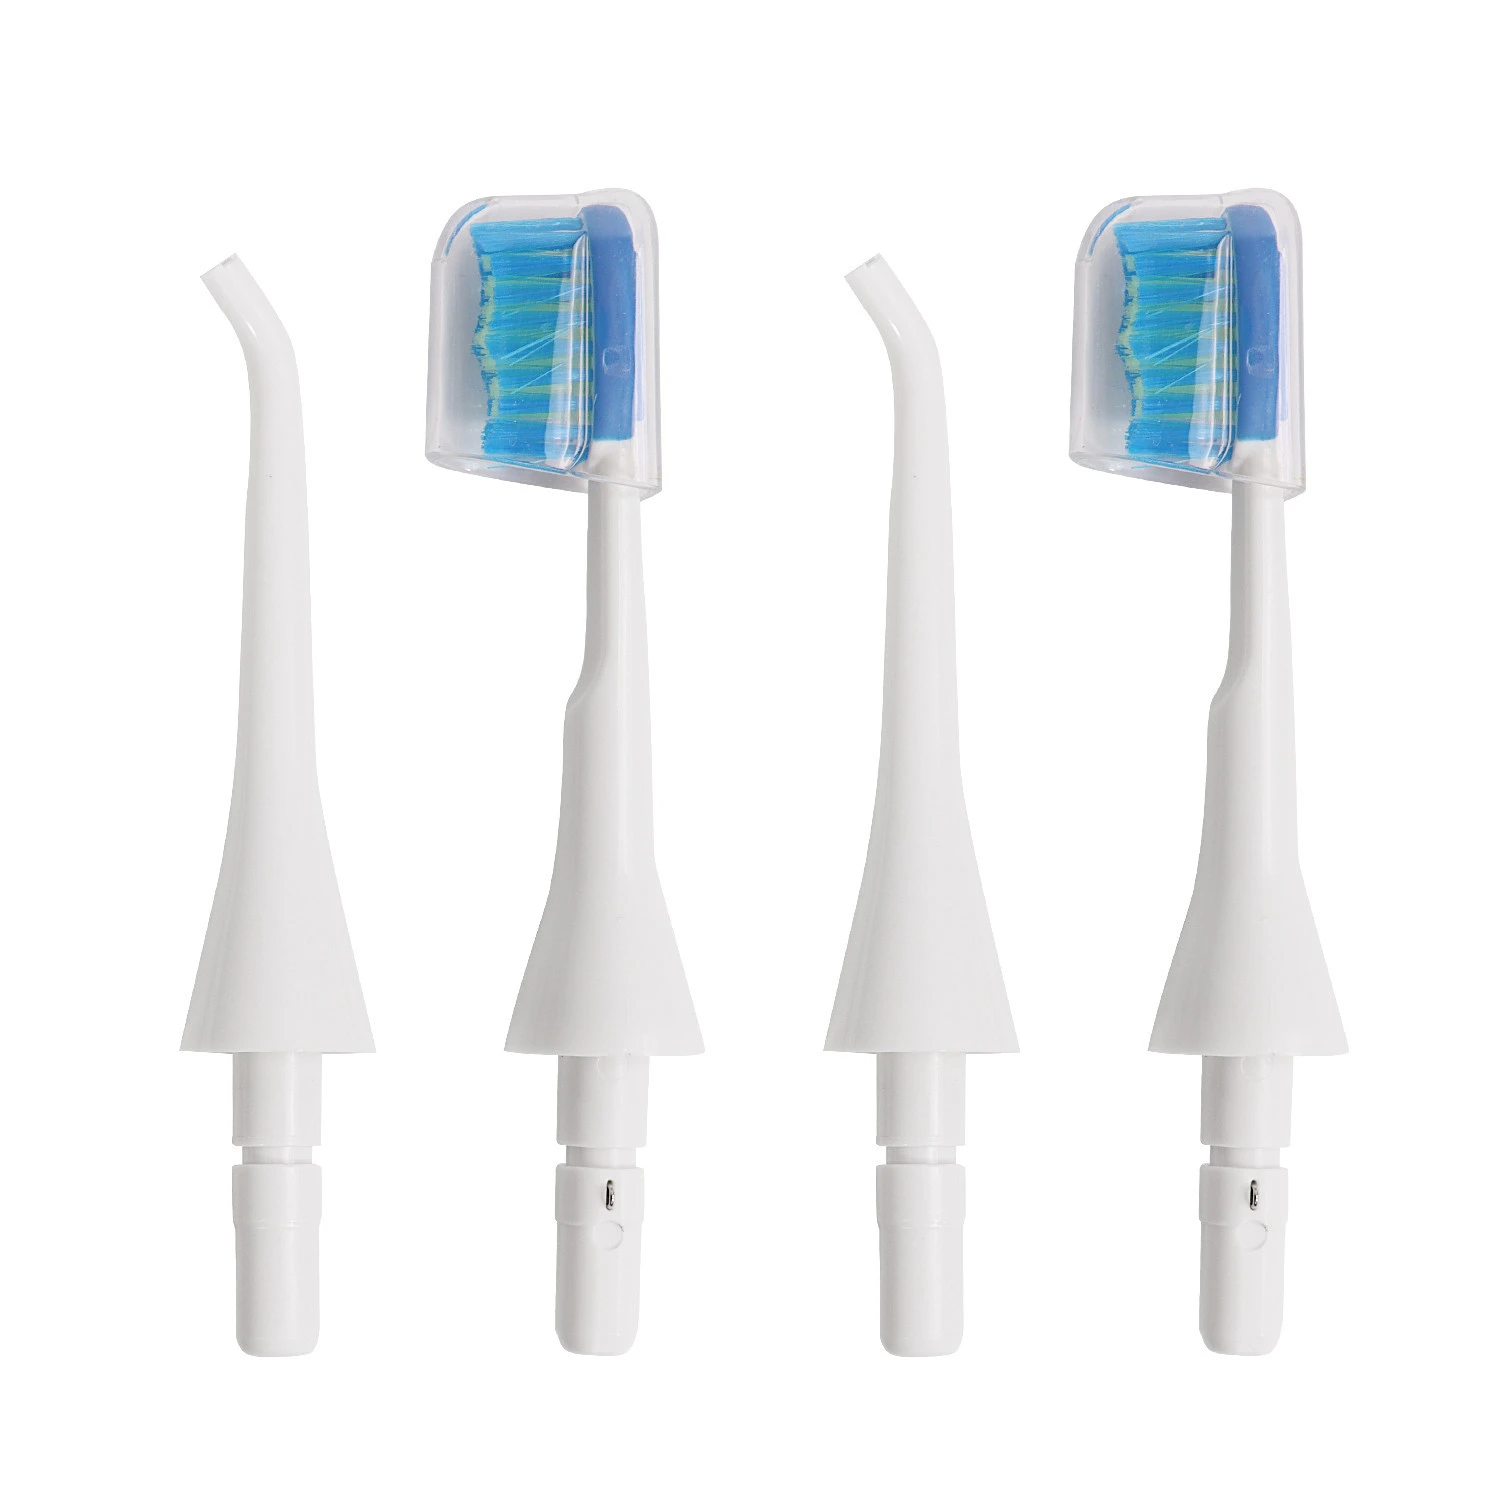 Replacement 2 heads sonic toothbrush oral hygiene water flosser